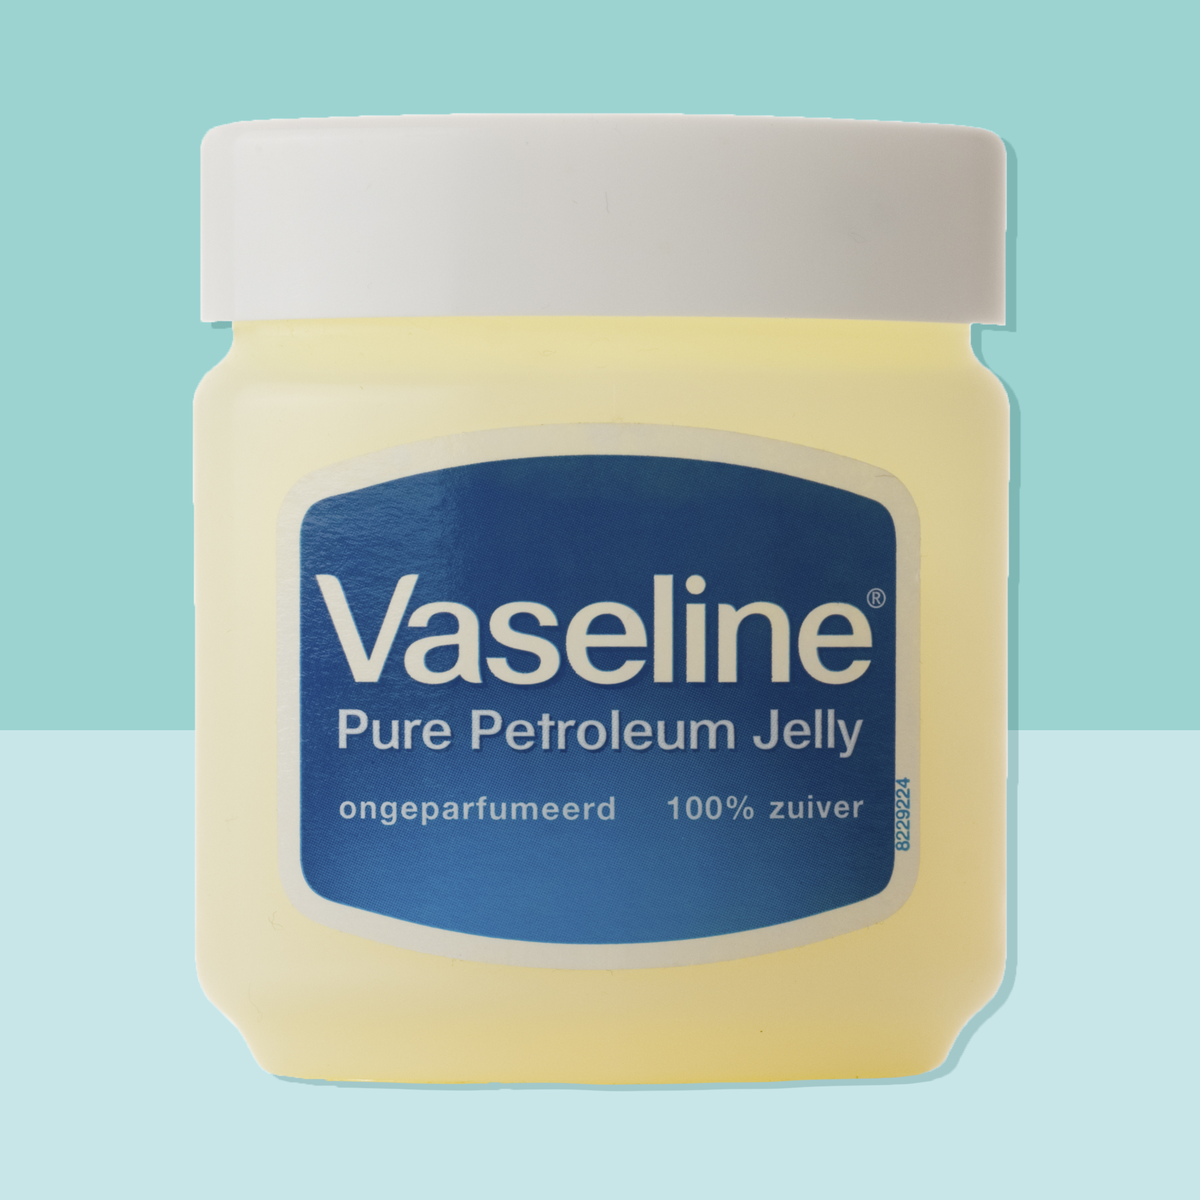 15 Great Vaseline Uses for Skin - Petroleum Jelly Good For Your Face?